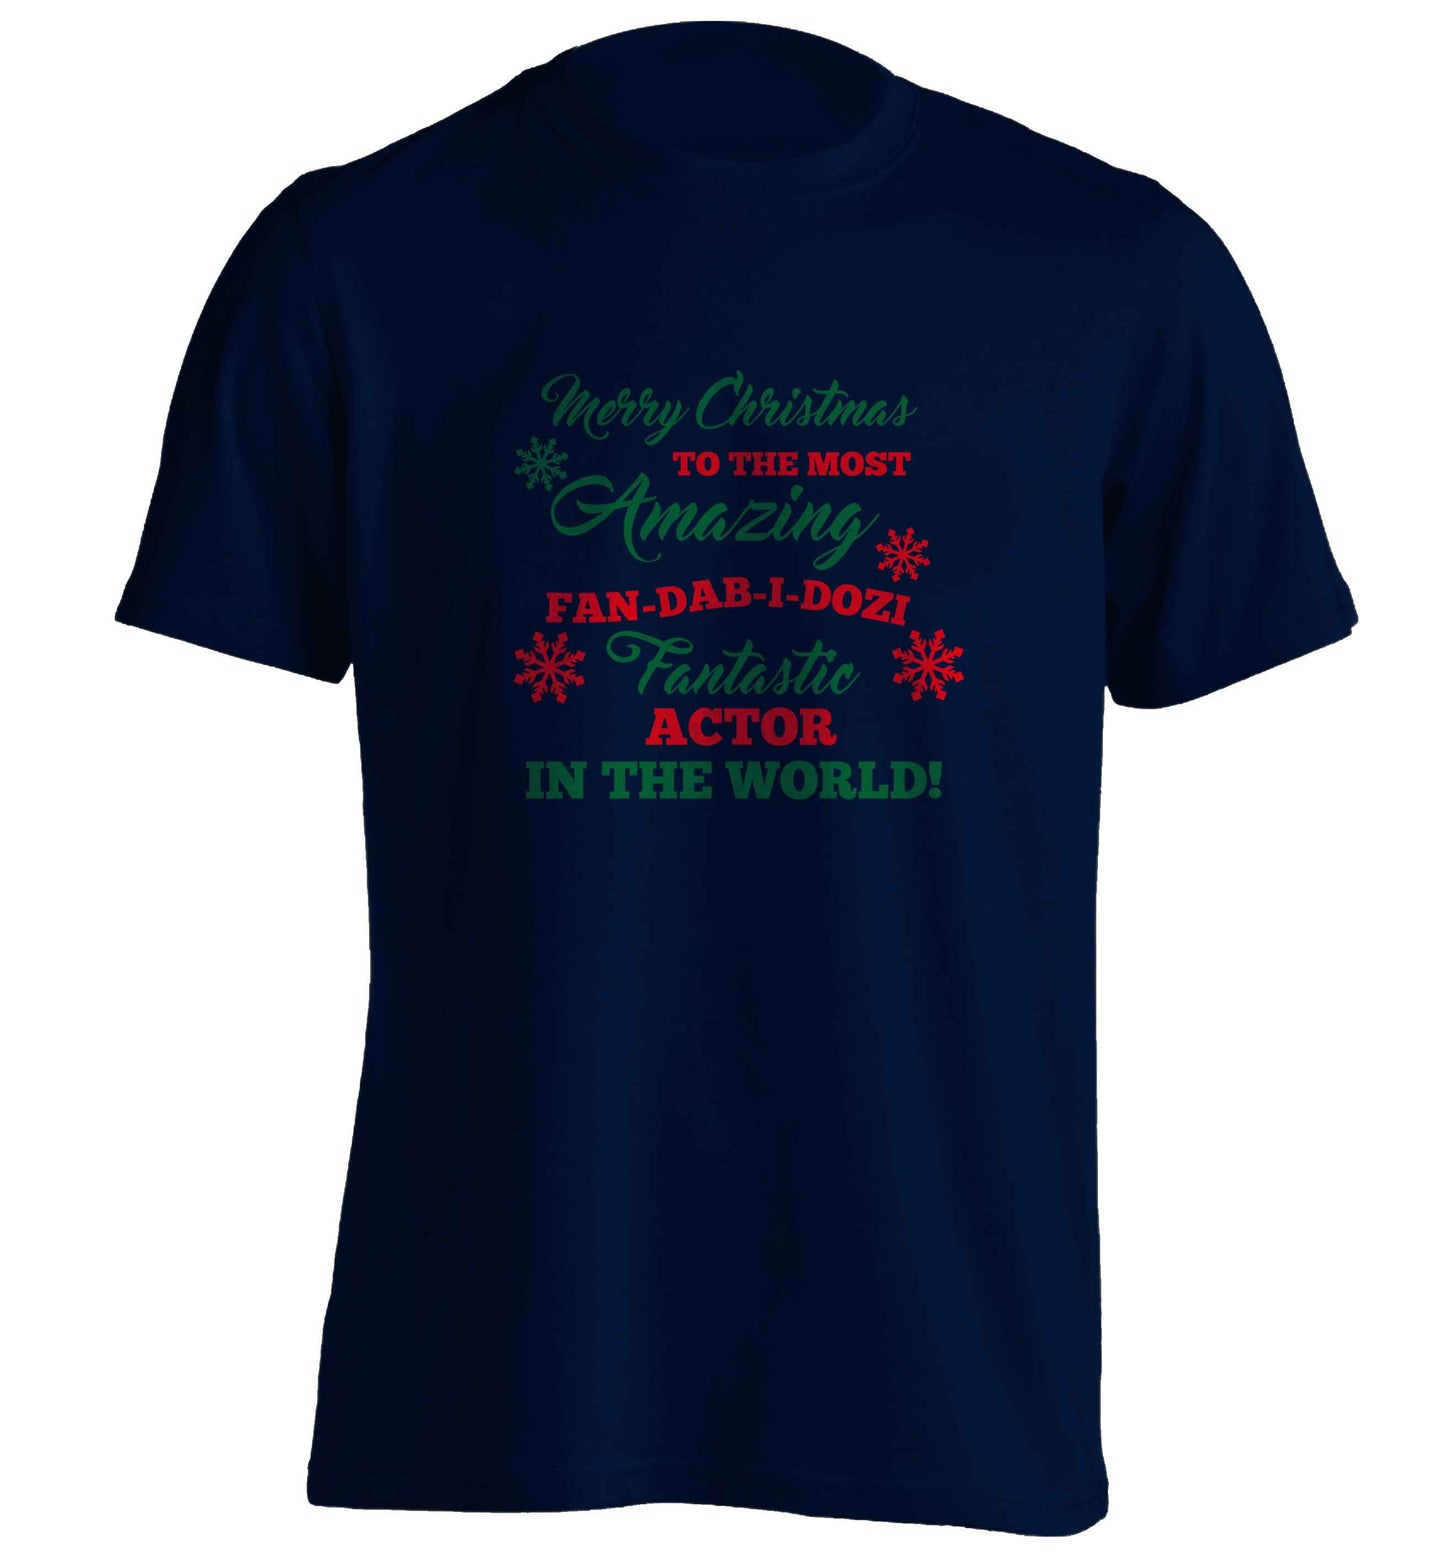 Merry Christmas to the most amazing actor in the world! adults unisex navy Tshirt 2XL